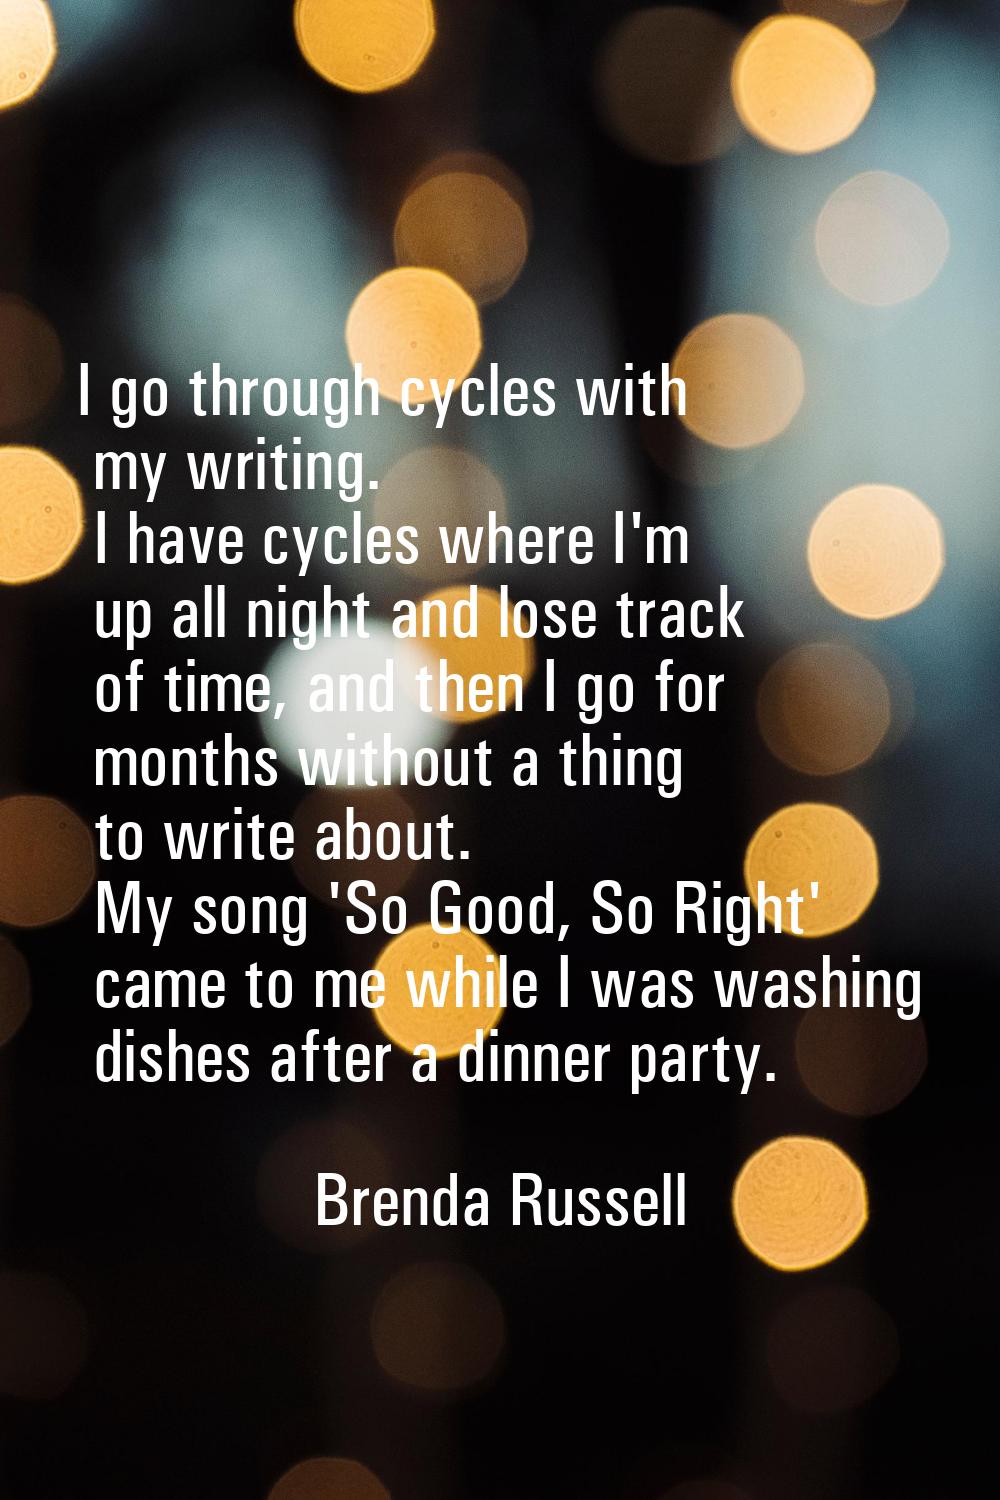 I go through cycles with my writing. I have cycles where I'm up all night and lose track of time, a